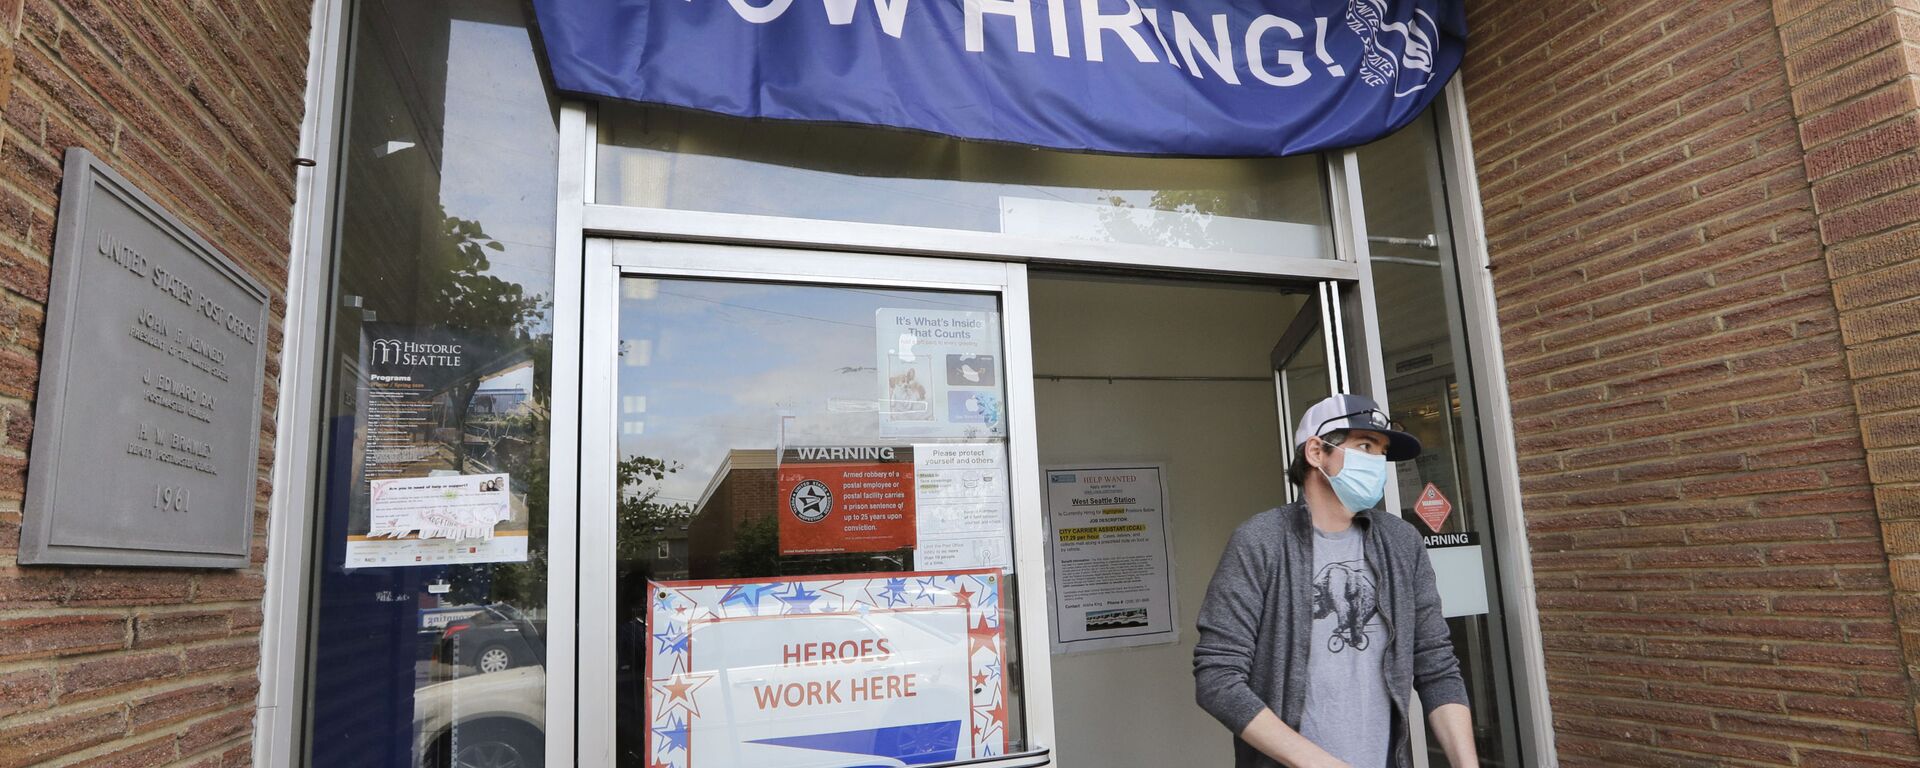 In this Thursday, June 4, 2020 file photo, a customer walks out of a U.S. Post Office branch and under a banner advertising a job opening, in Seattle. The job market took a big step toward healing in May 2020, though plenty of damage remains, as a record level of hiring followed record layoffs in March and April. The Labor Department reported Tuesday, July 7, 2020 that the number of available jobs rose sharply as well, but remained far below pre-pandemic levels.  - Sputnik International, 1920, 18.02.2021